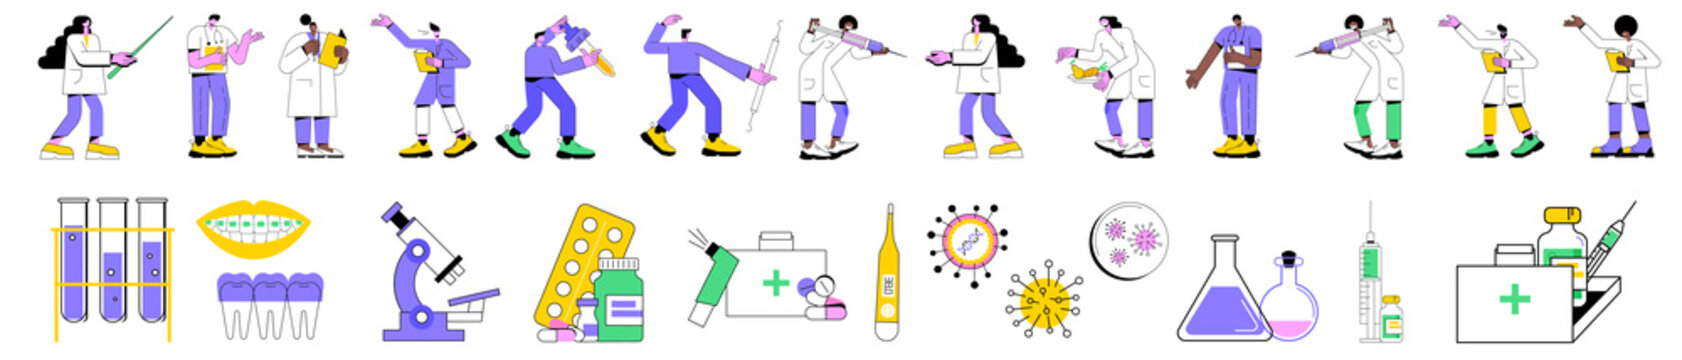 Colorful linear vector isolated illustration bundle set of medical worker characters. Hospital doctors and nurses, medical laboratory test tube, dentistry and pharmacy, disease diagnosis and treatment